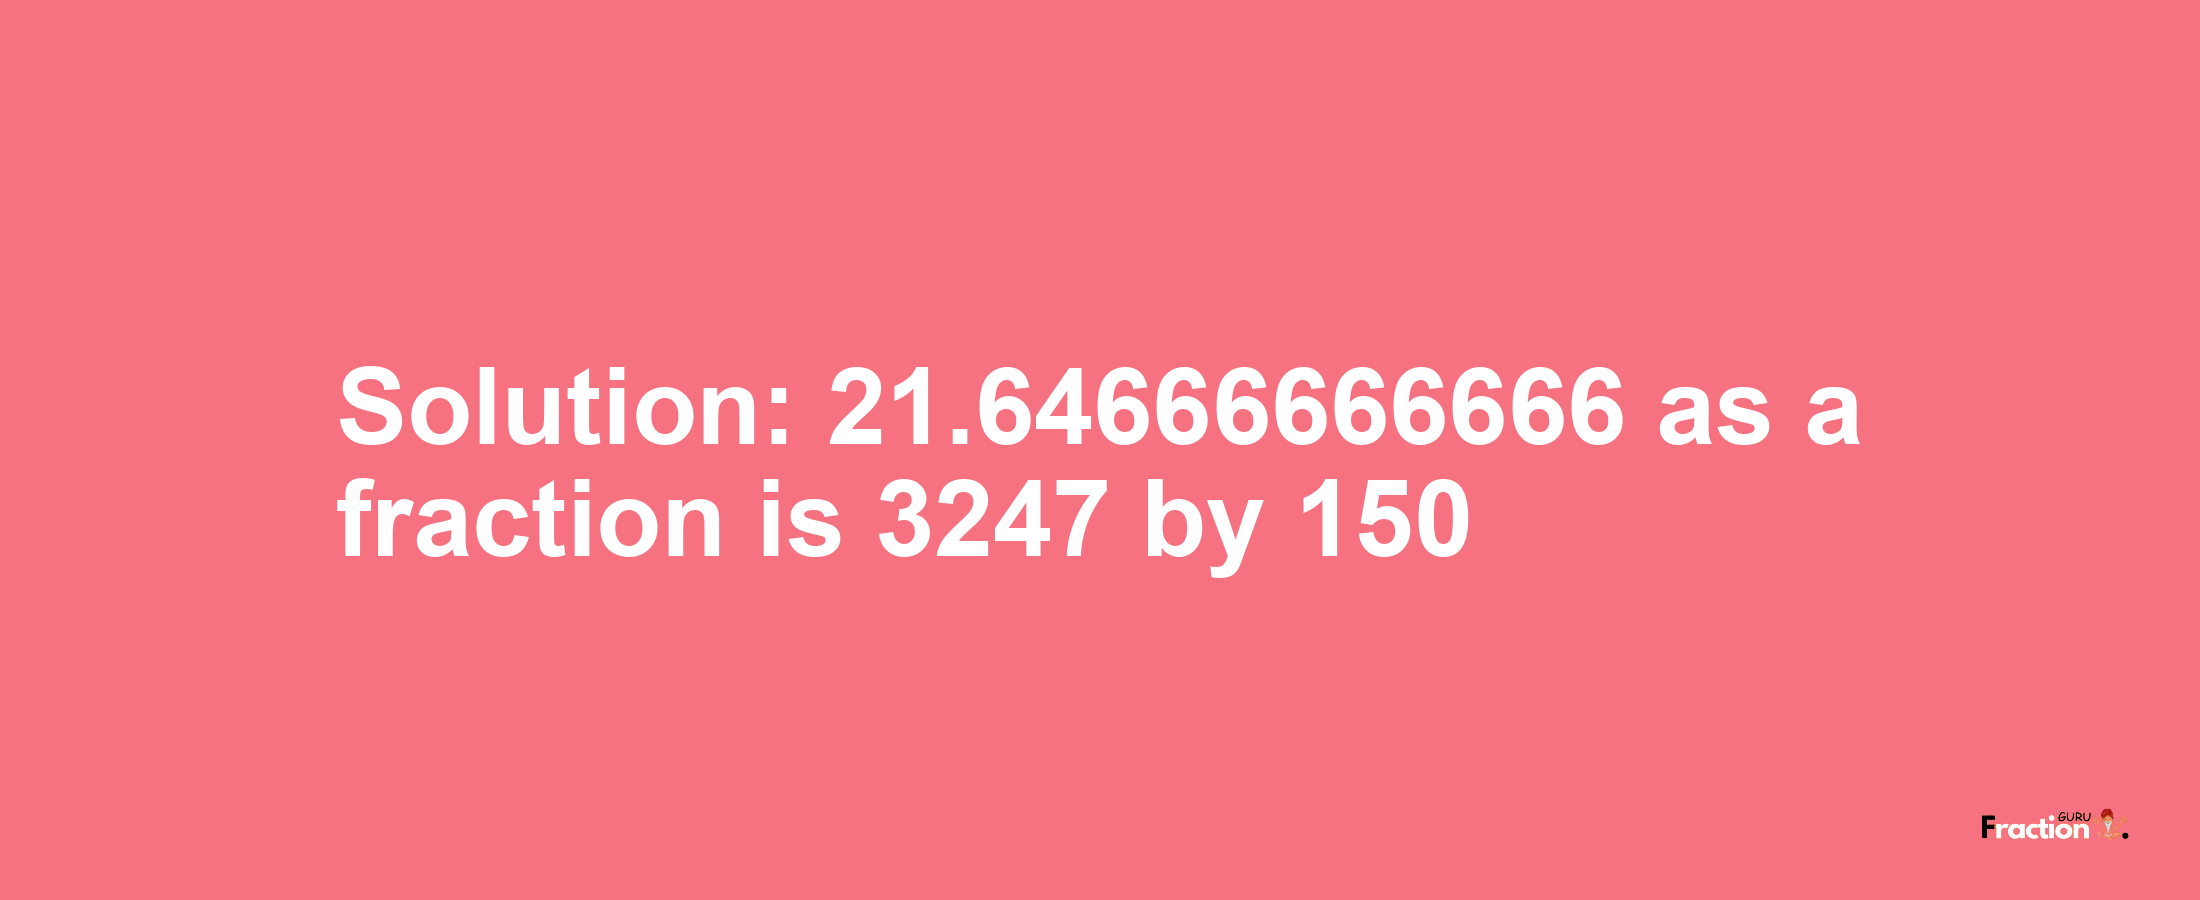 Solution:21.64666666666 as a fraction is 3247/150